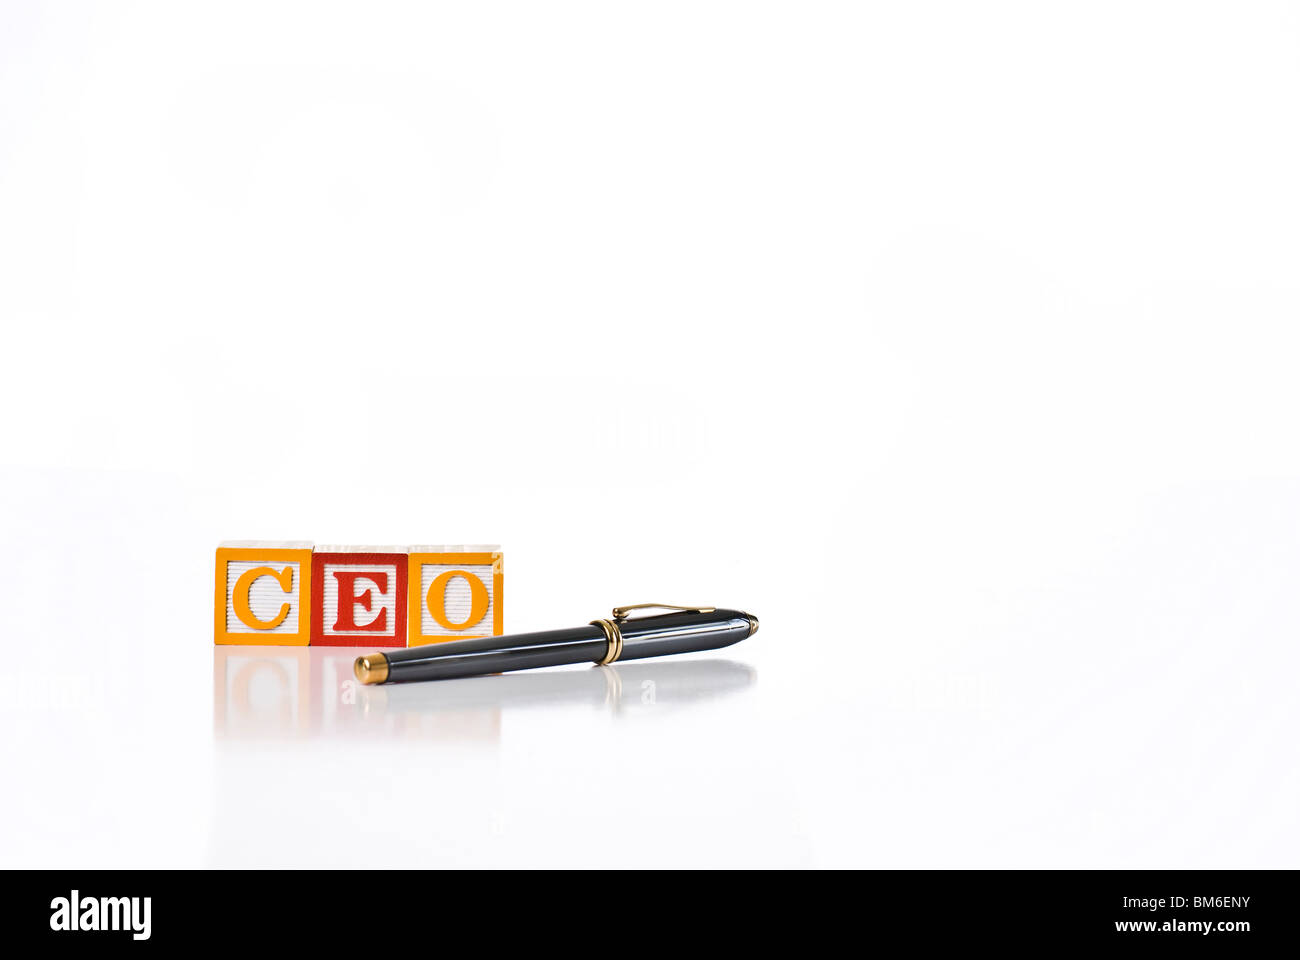 Colorful children's blocks spelling CEO with executive style pen Stock Photo